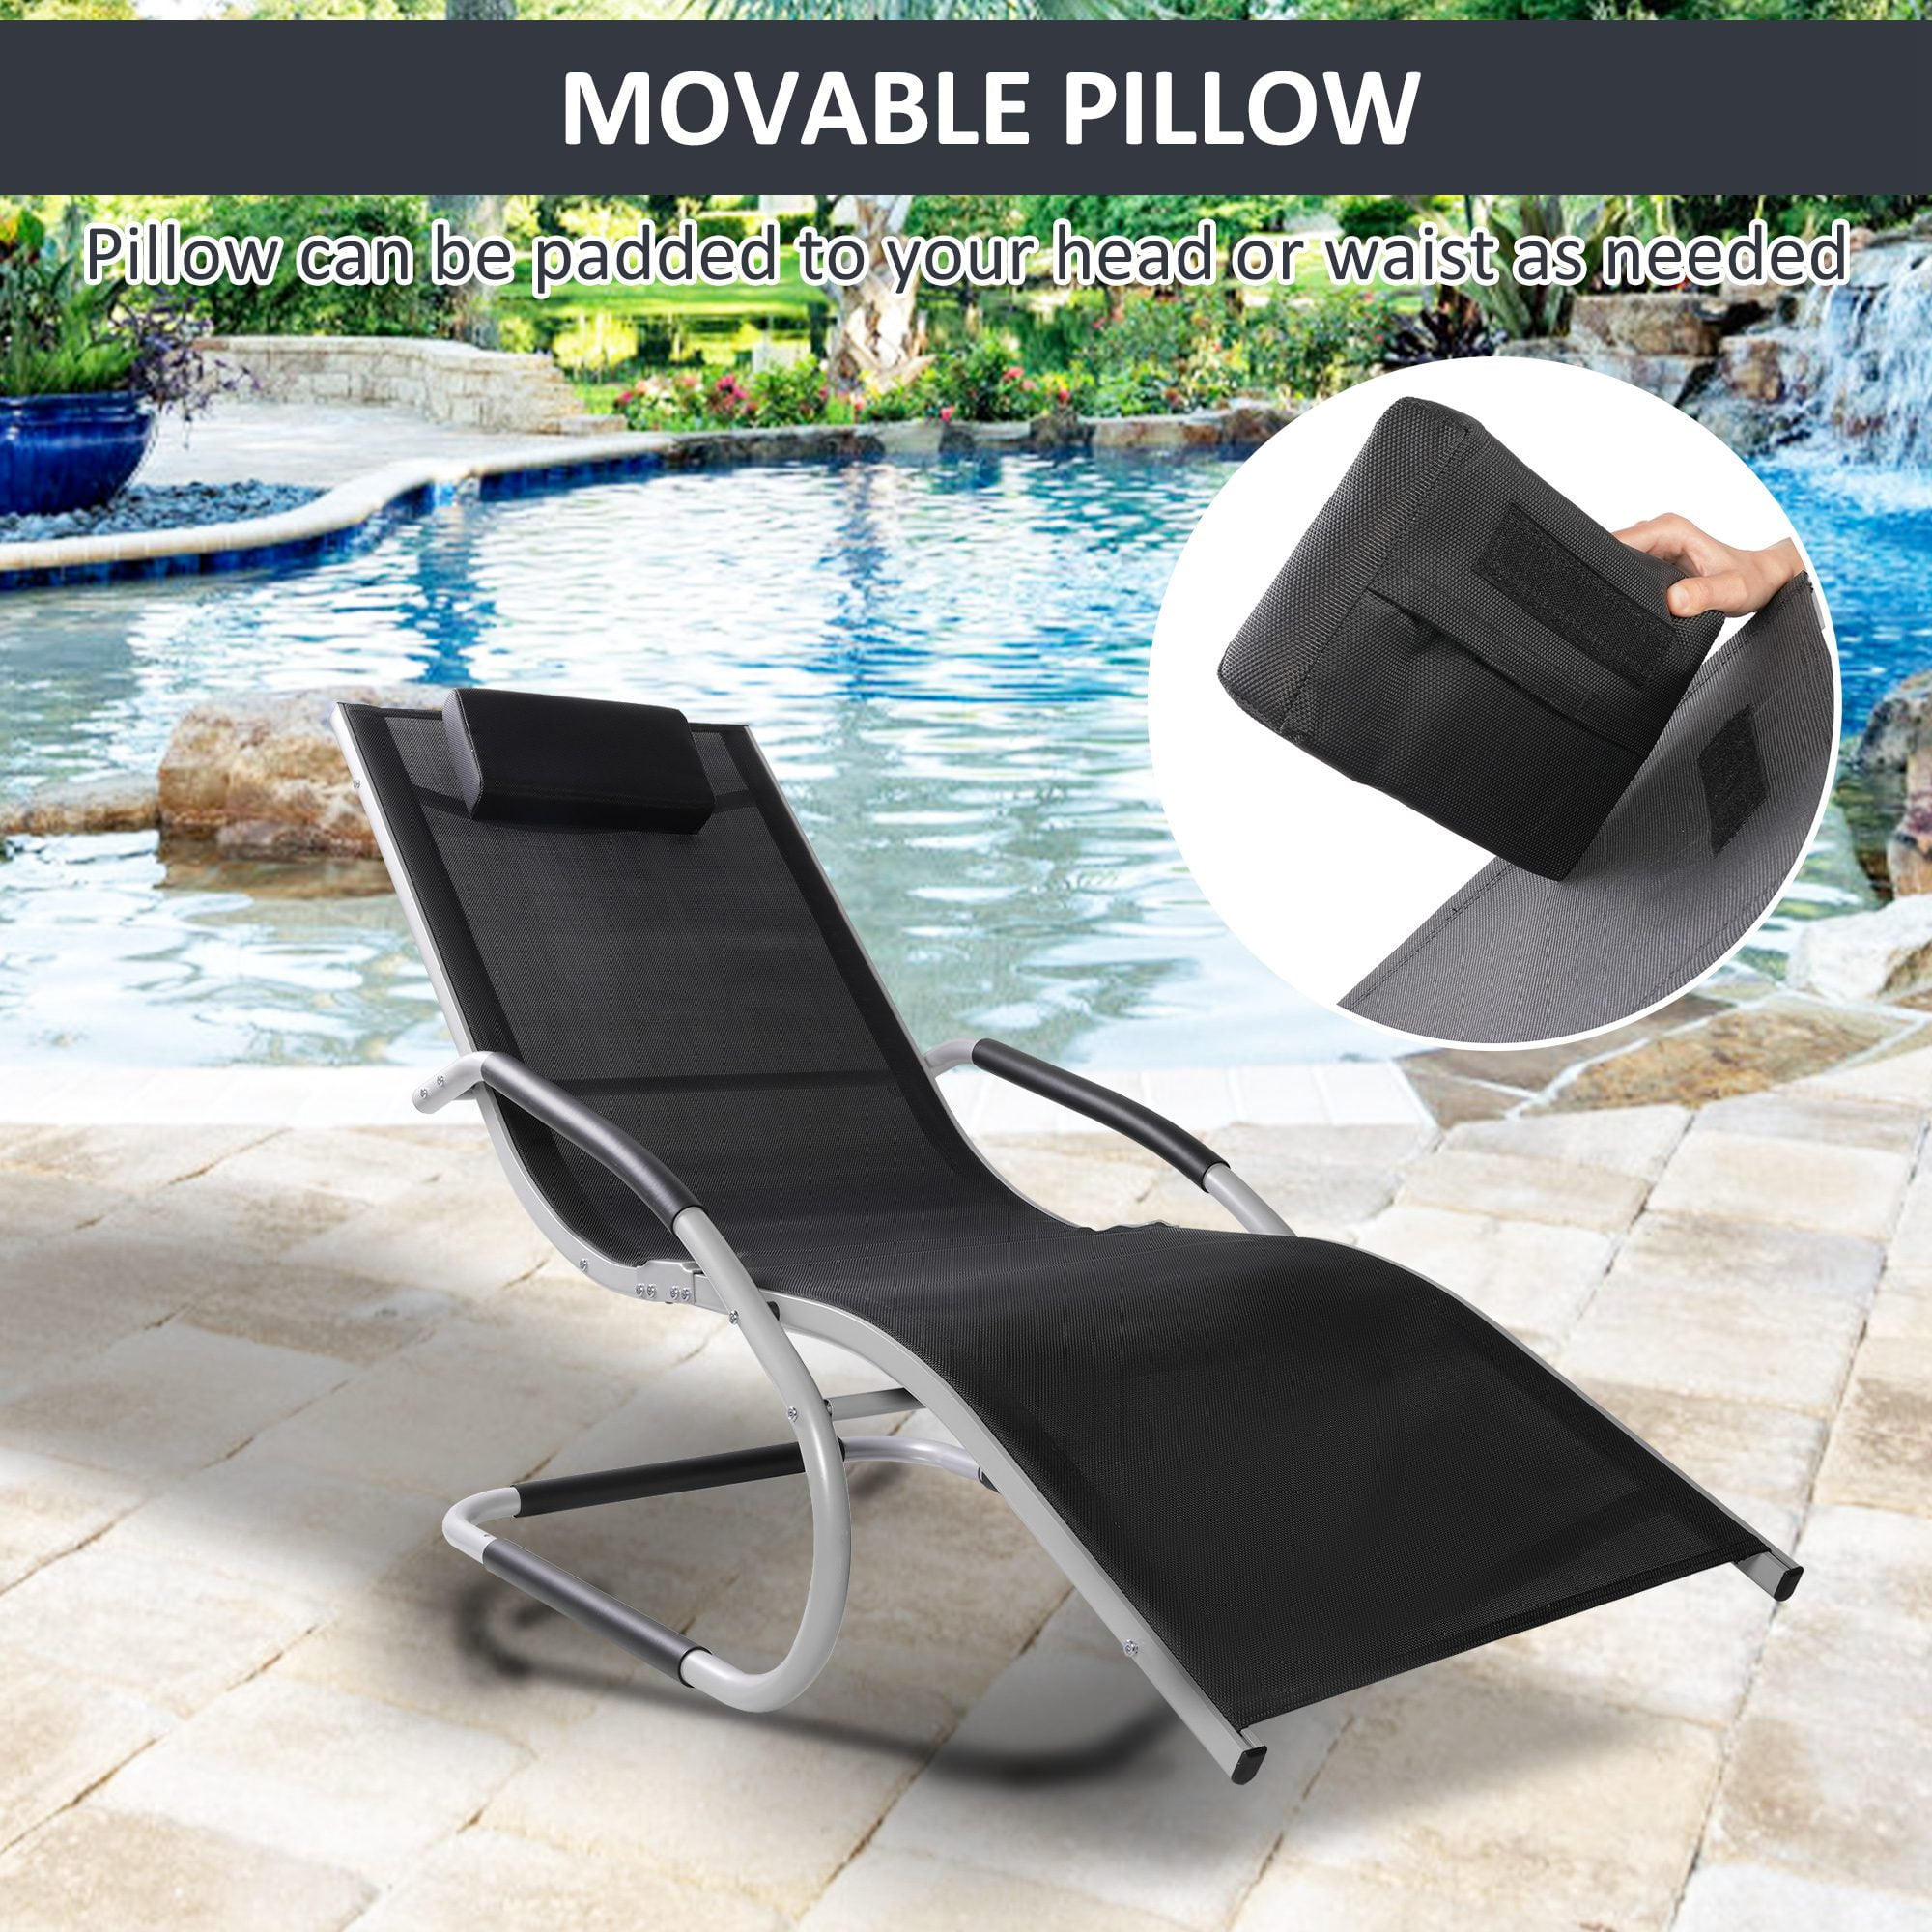  XFXDBT Extra-Large Recliner Cushion with Ties,Non-Slip Cover  High-Back Support Sun Lounger Cushion Rocking Chair Pad Garden Chair Pads-f  52x150cm : Home & Kitchen